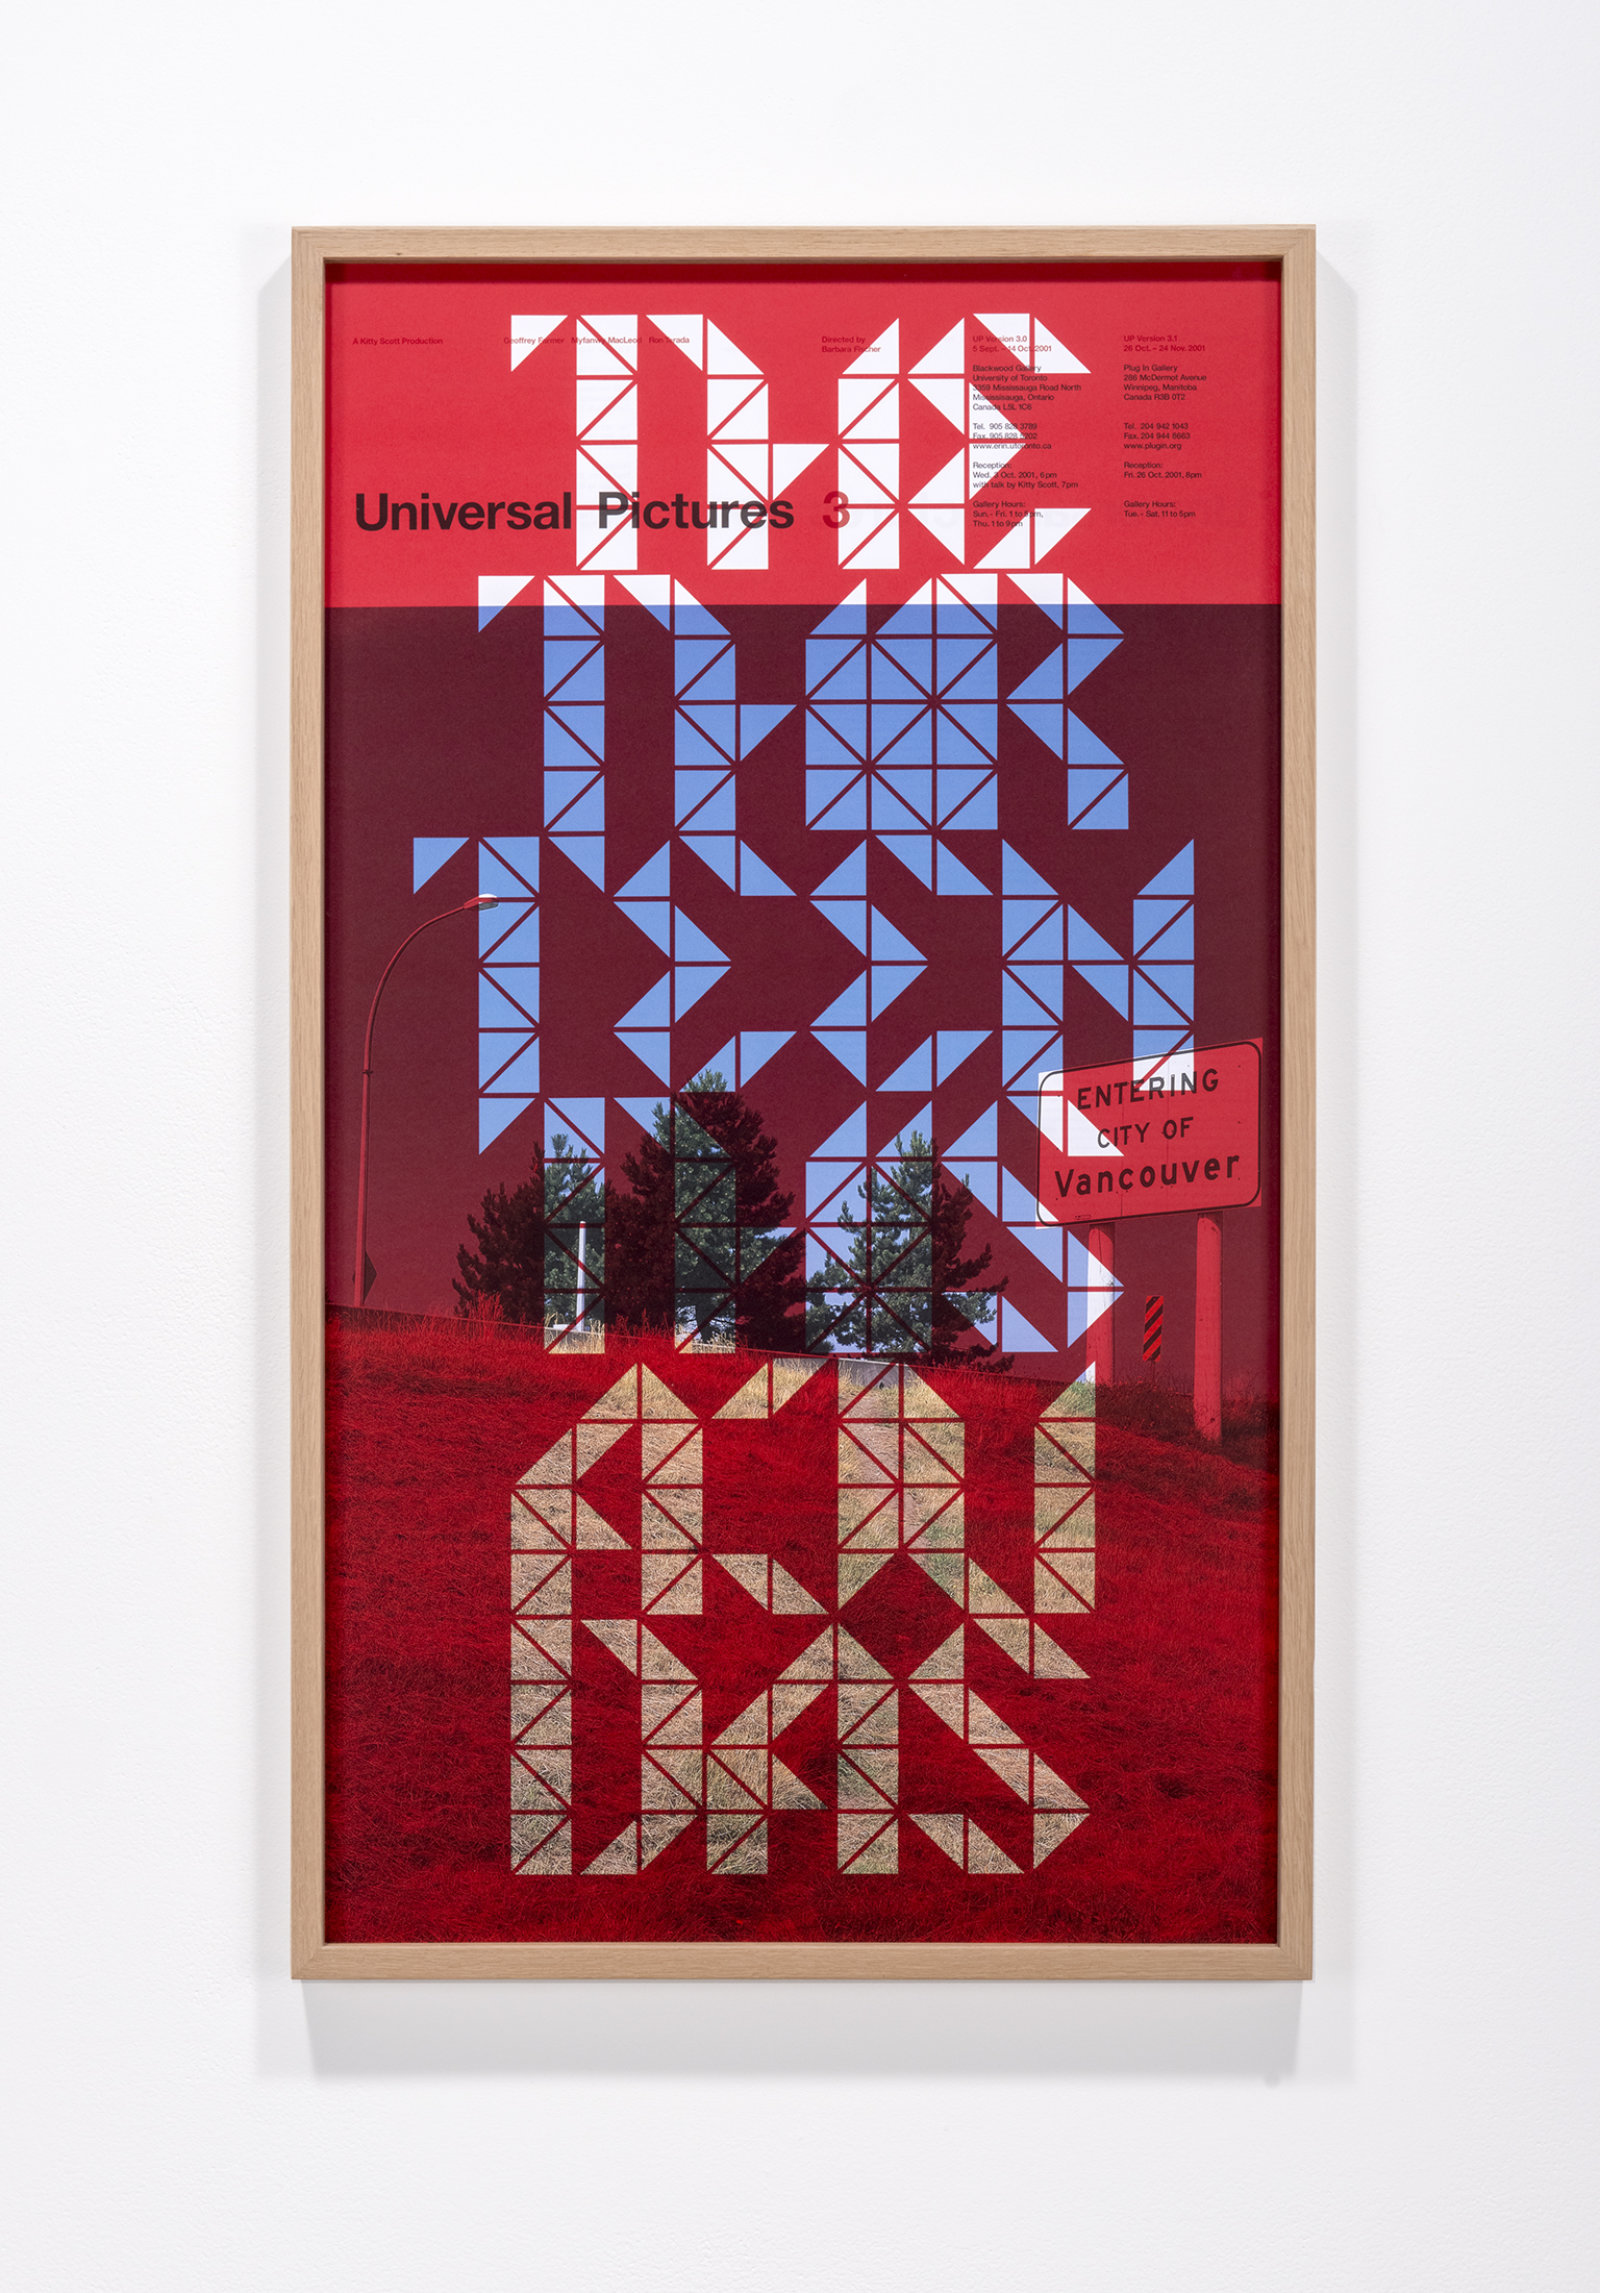 Ron Terada, THE THIRTEENTH IS A JUDAS, 2015, inkjet print on offset printed poster (2001), 35 x 20 in. (89 x 51 cm)